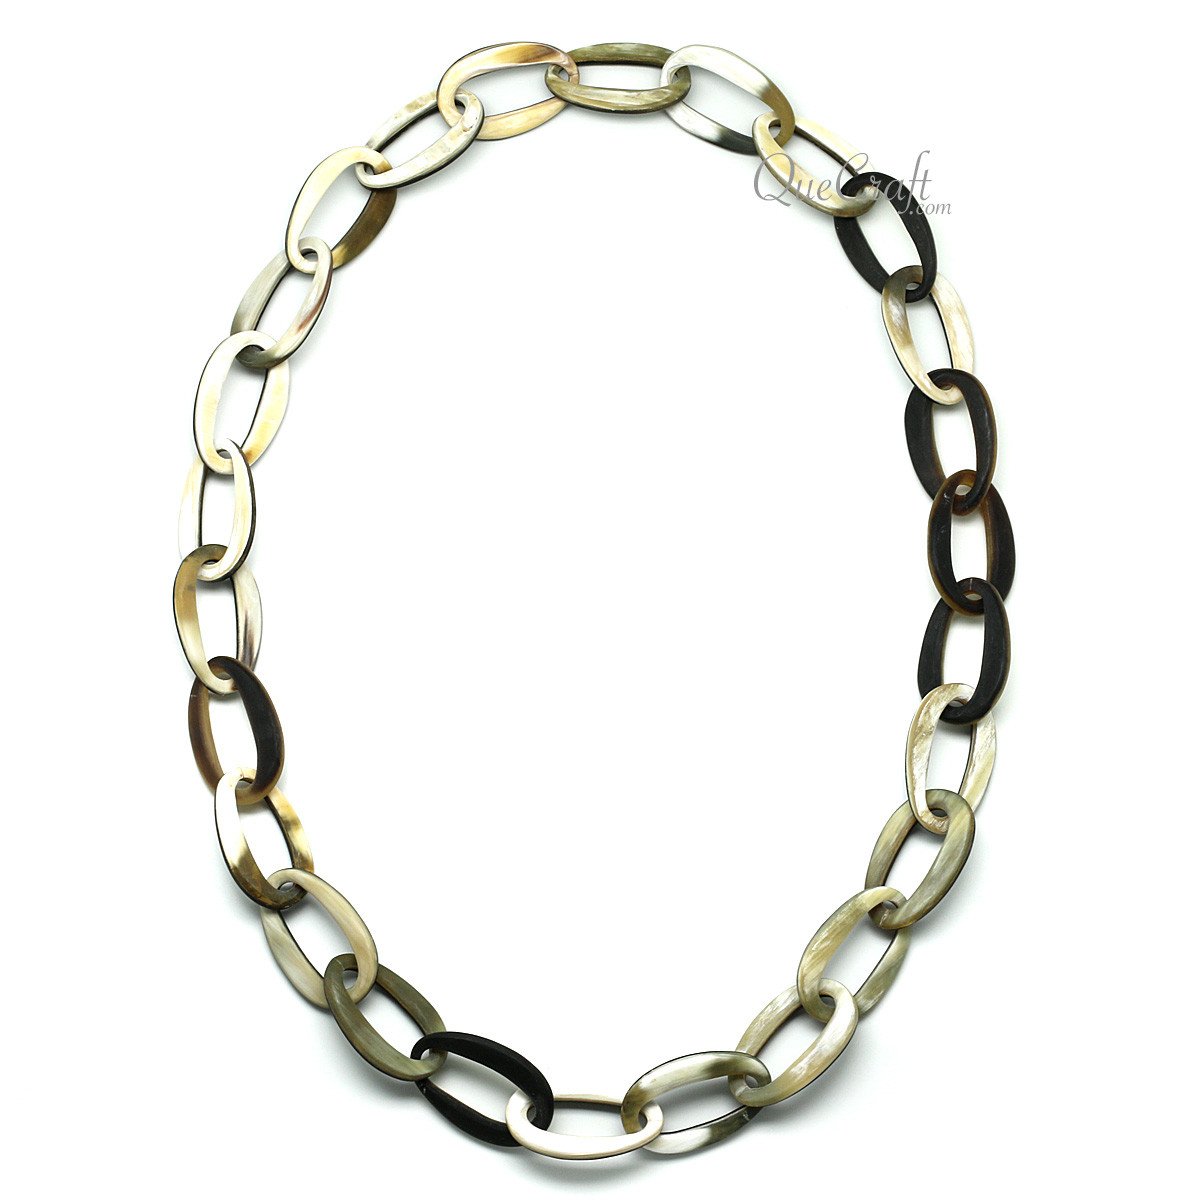 Horn Chain Necklace #11820 - HORN JEWELRY